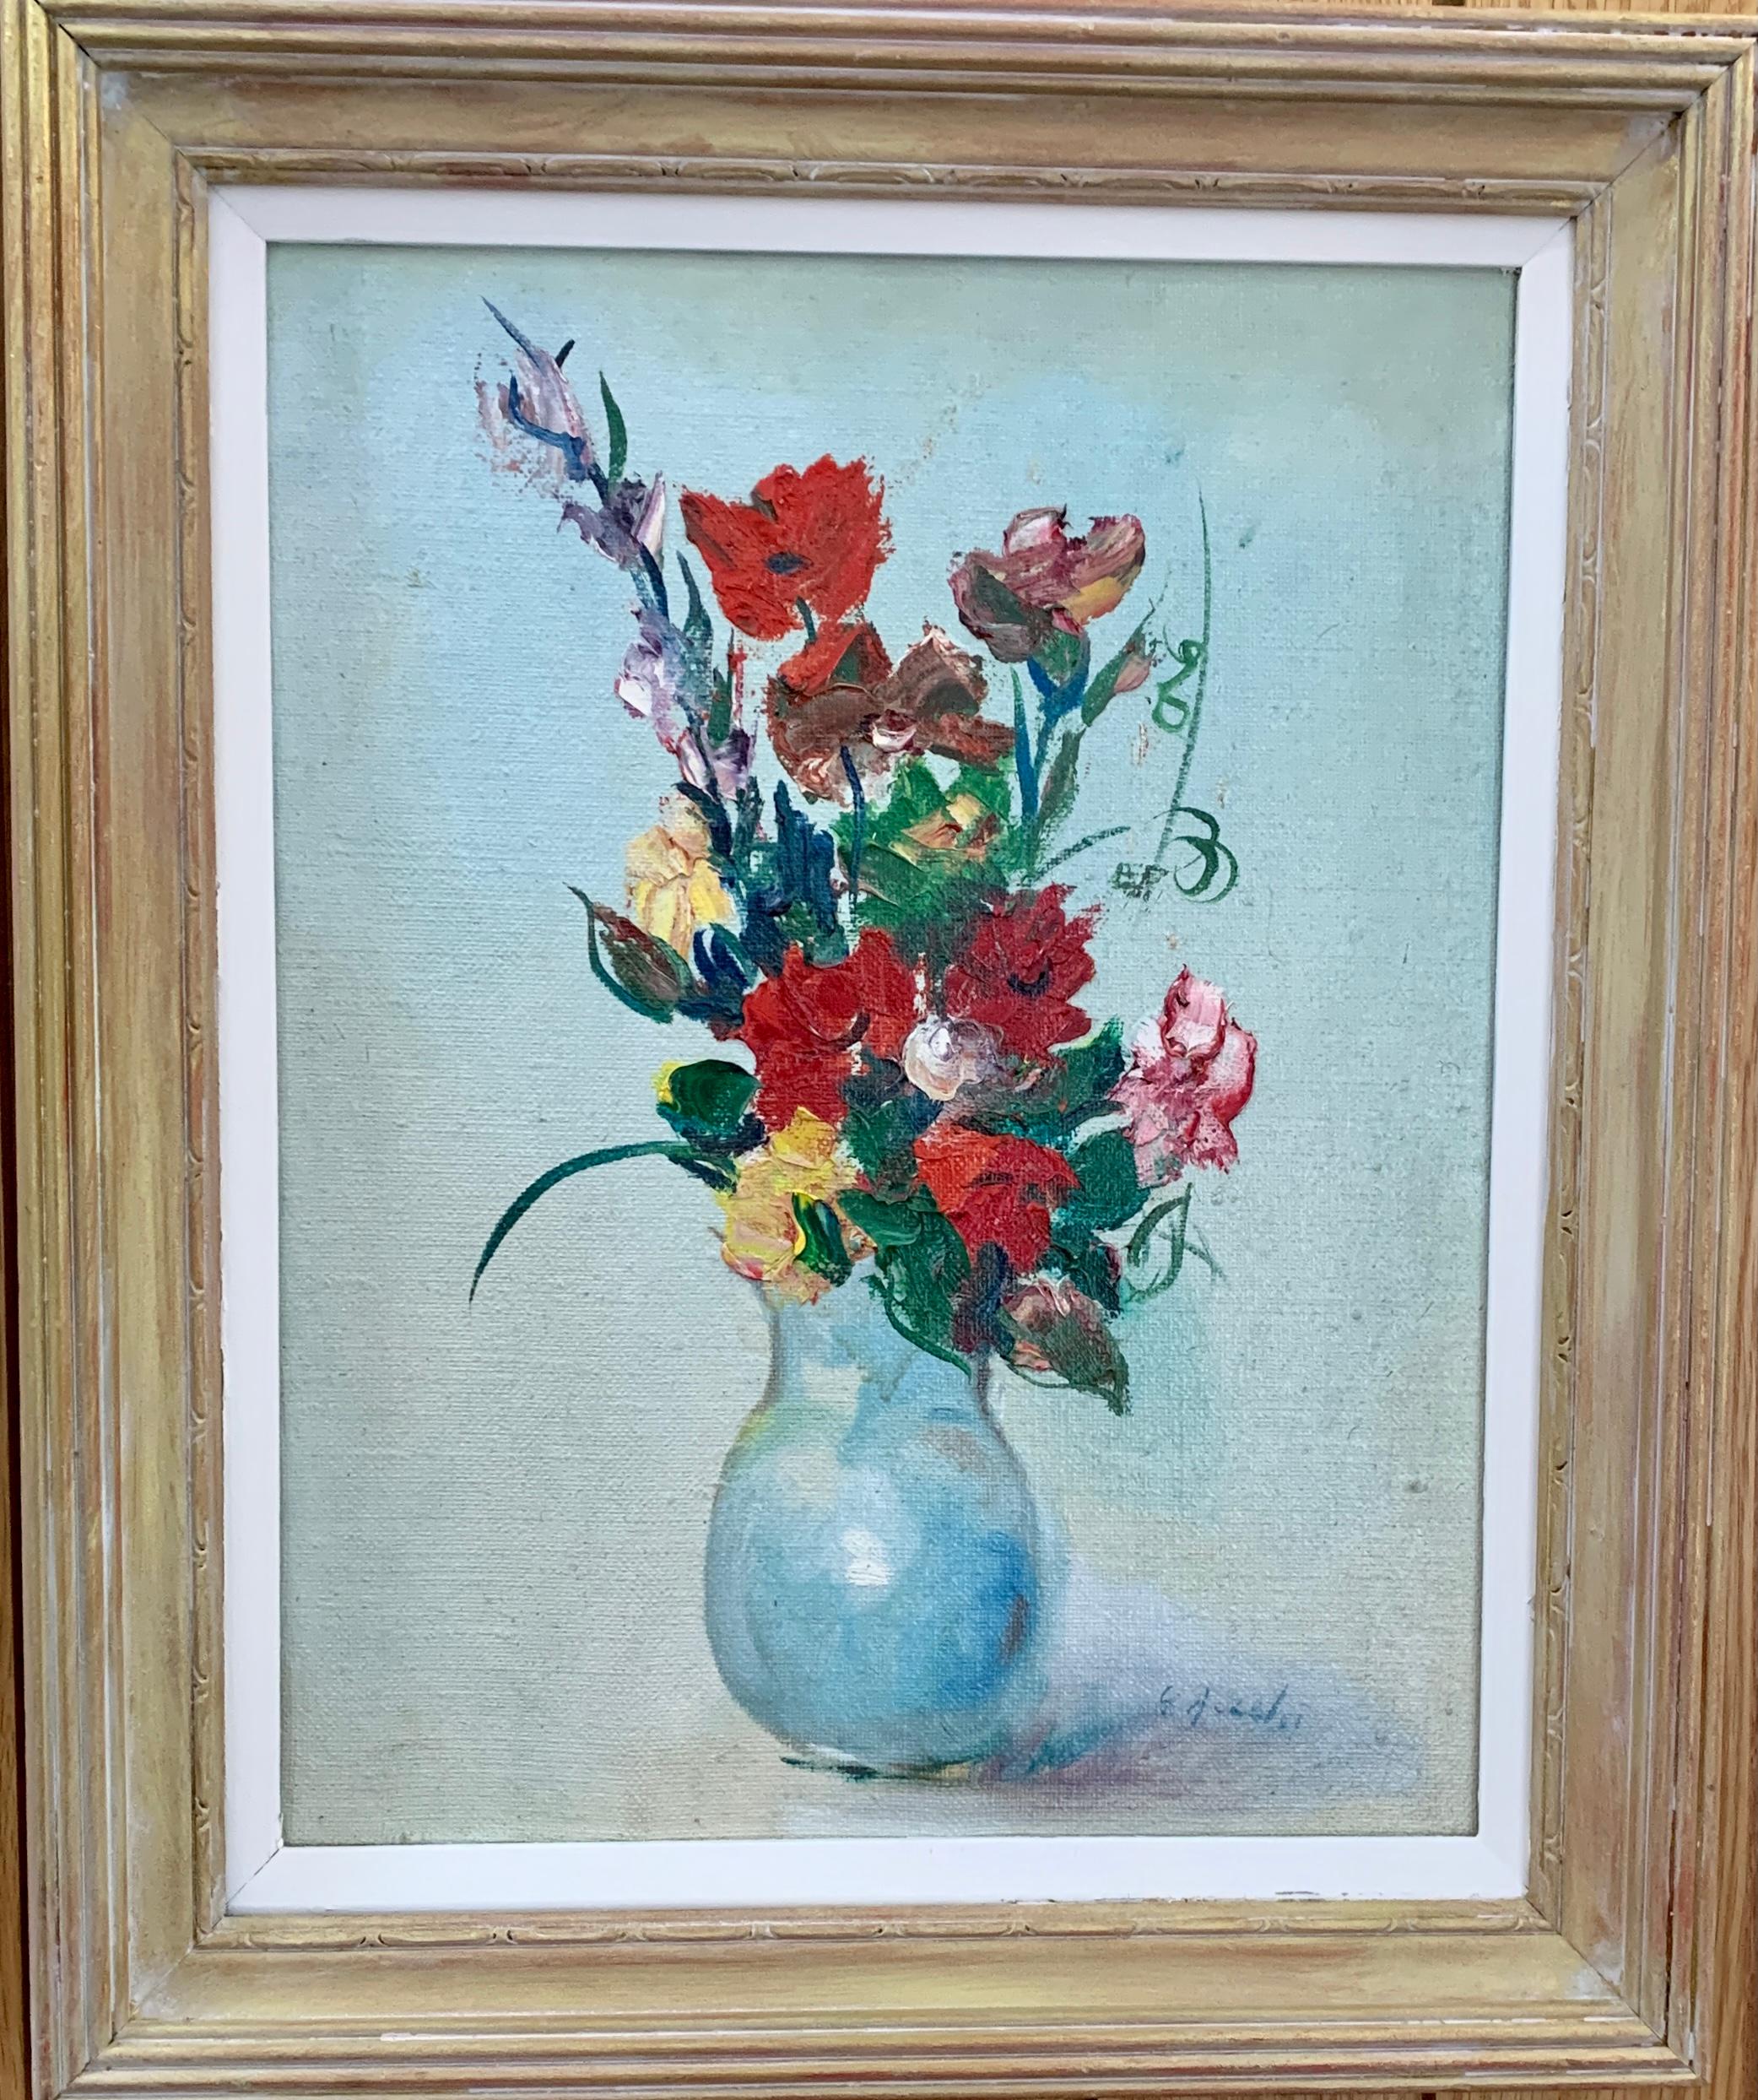 Impressionist mid 20th century still life of flowers in a vase, with poppies